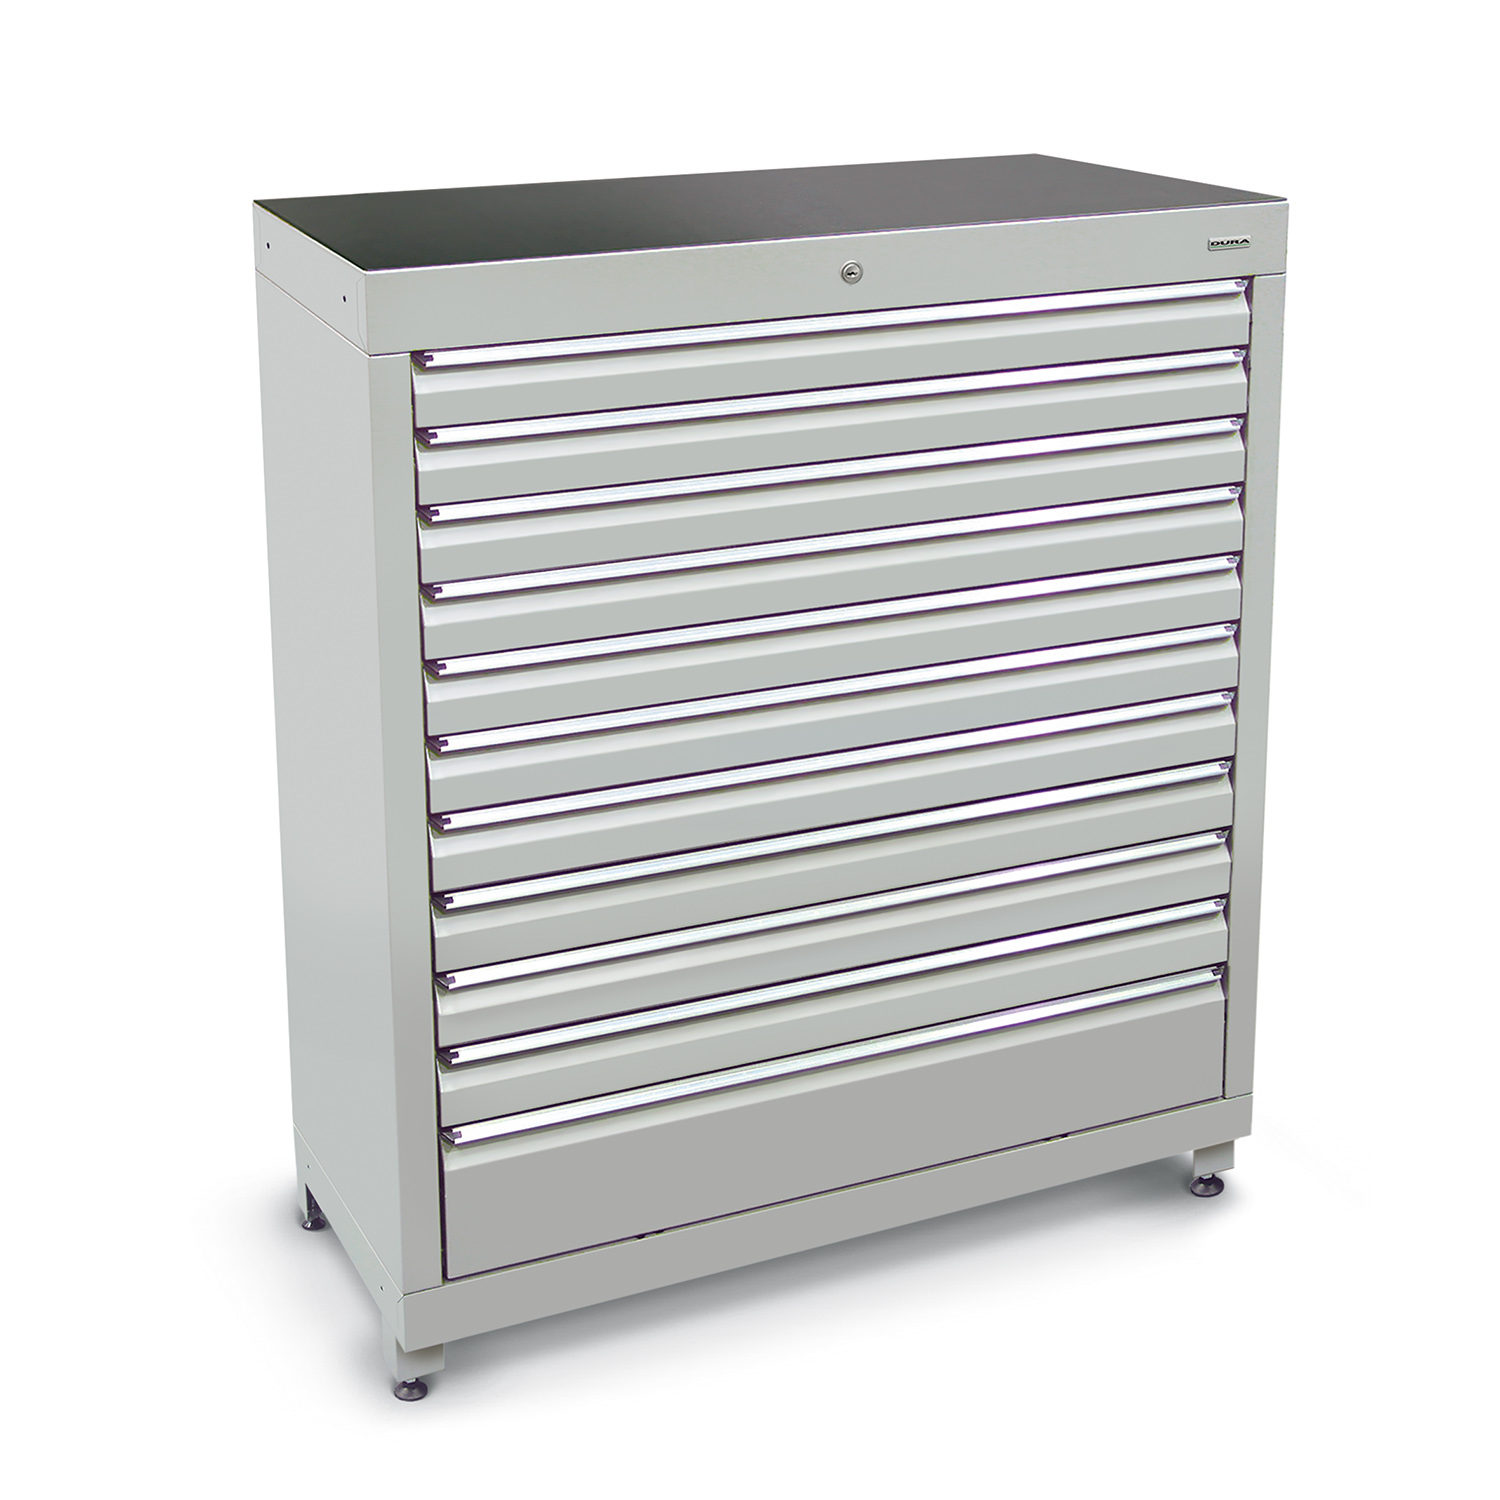 1200mm Multi-drawer high tool cabinets with 11 drawers (10 medium, 1 large) and feet